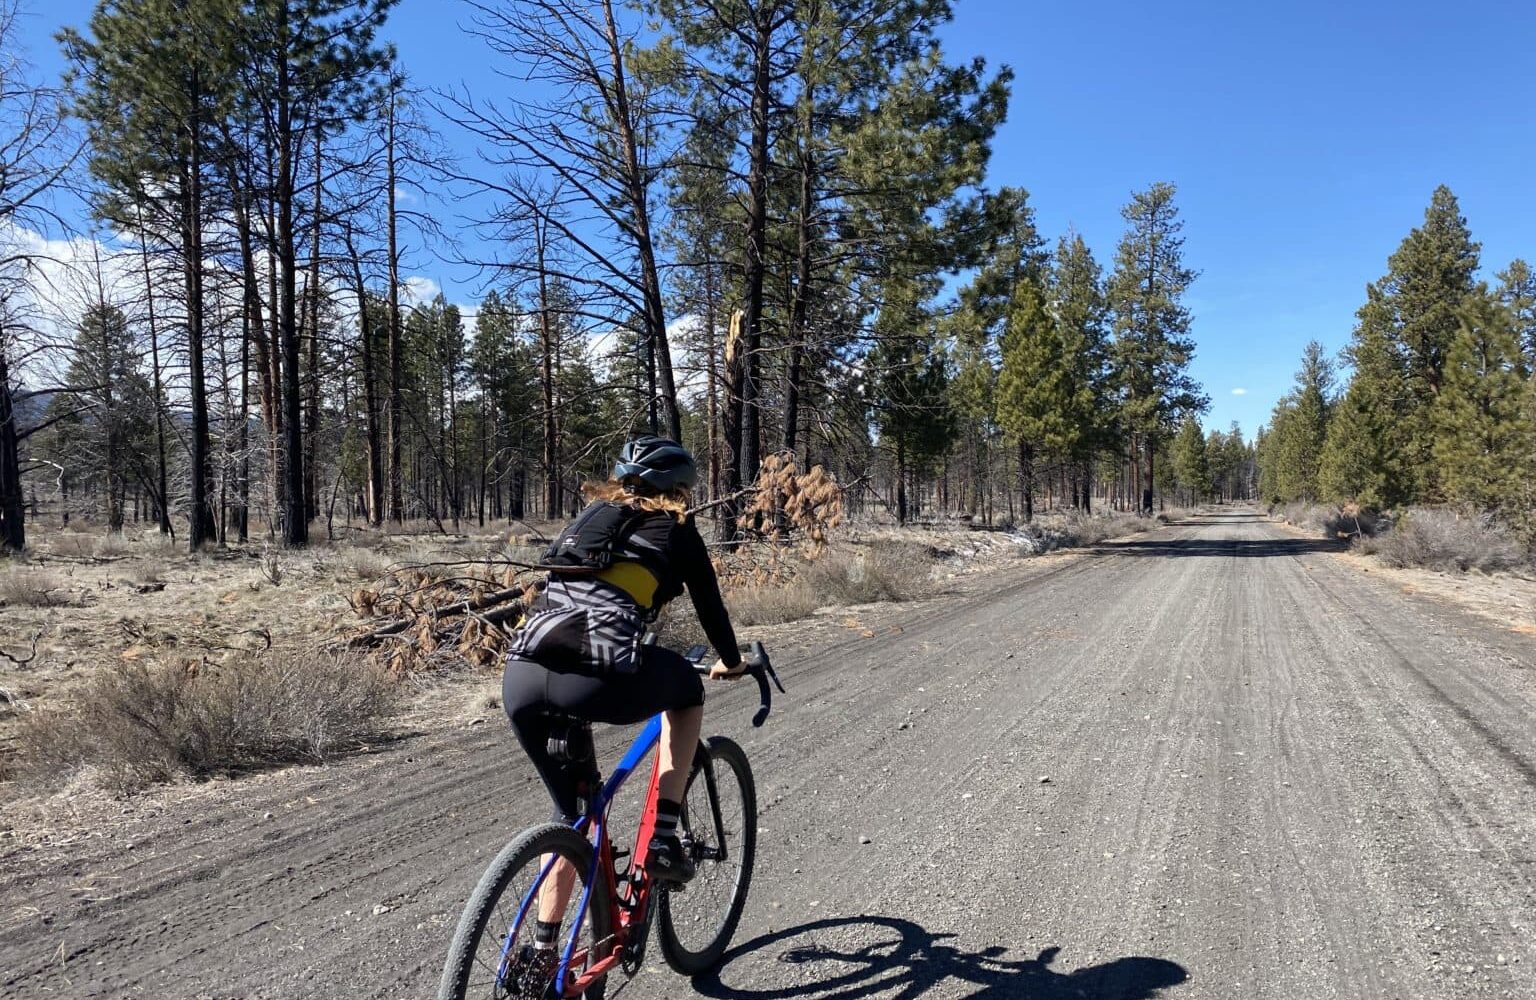 Gravel cyclist on Brooks Scanlon Logging road where the Bull Springs fire took place.